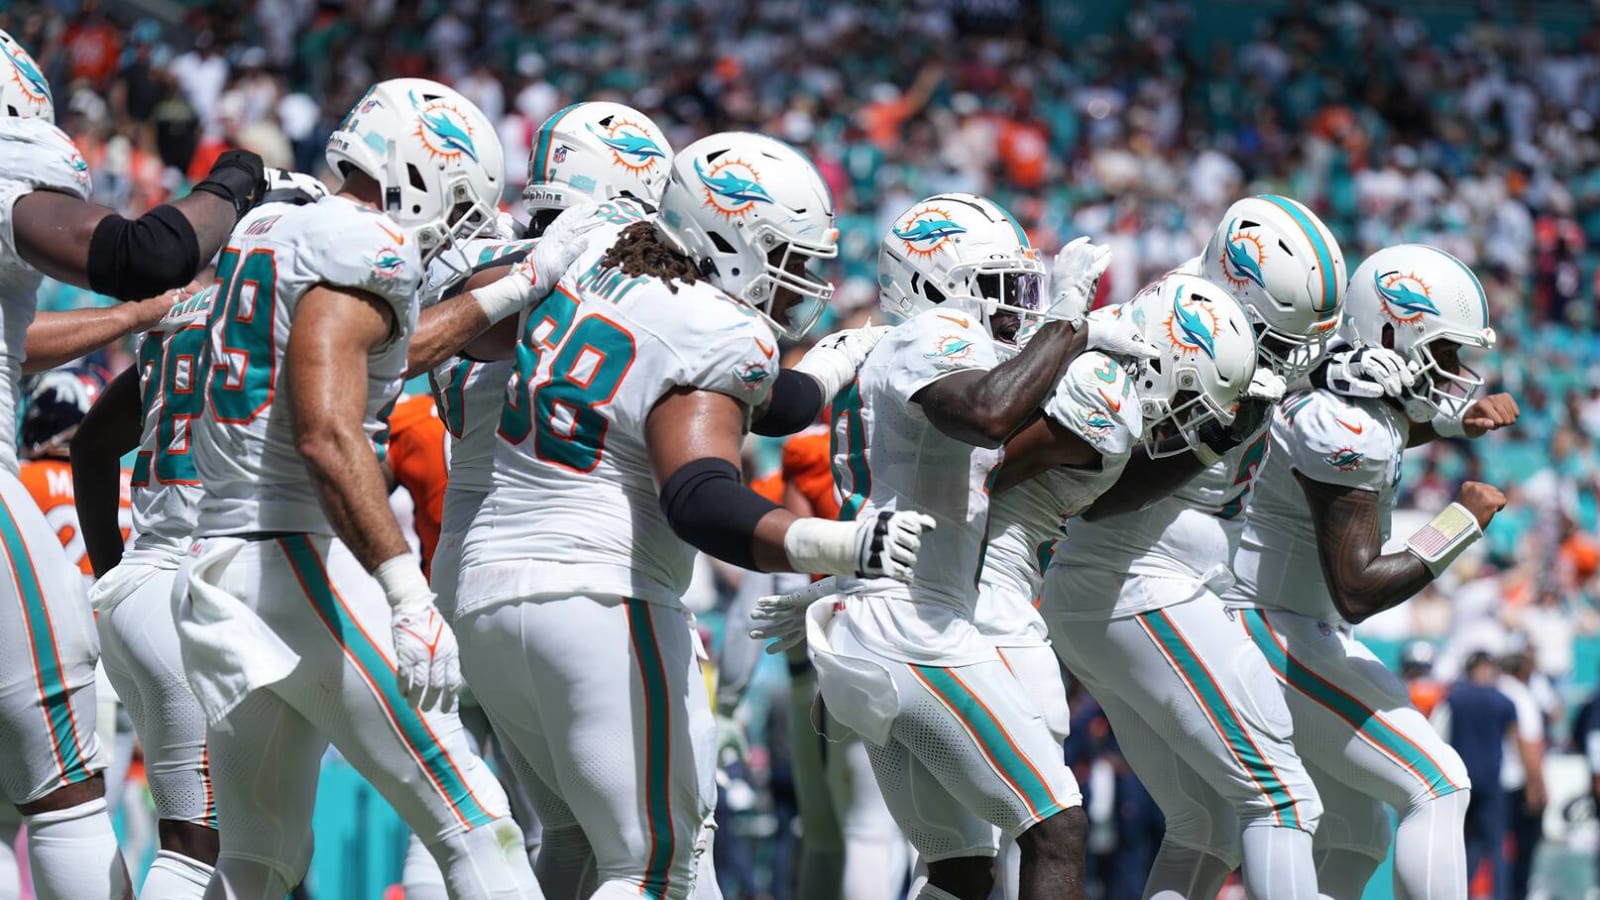 Dolphins re-write history books in 70-20 rout of Broncos